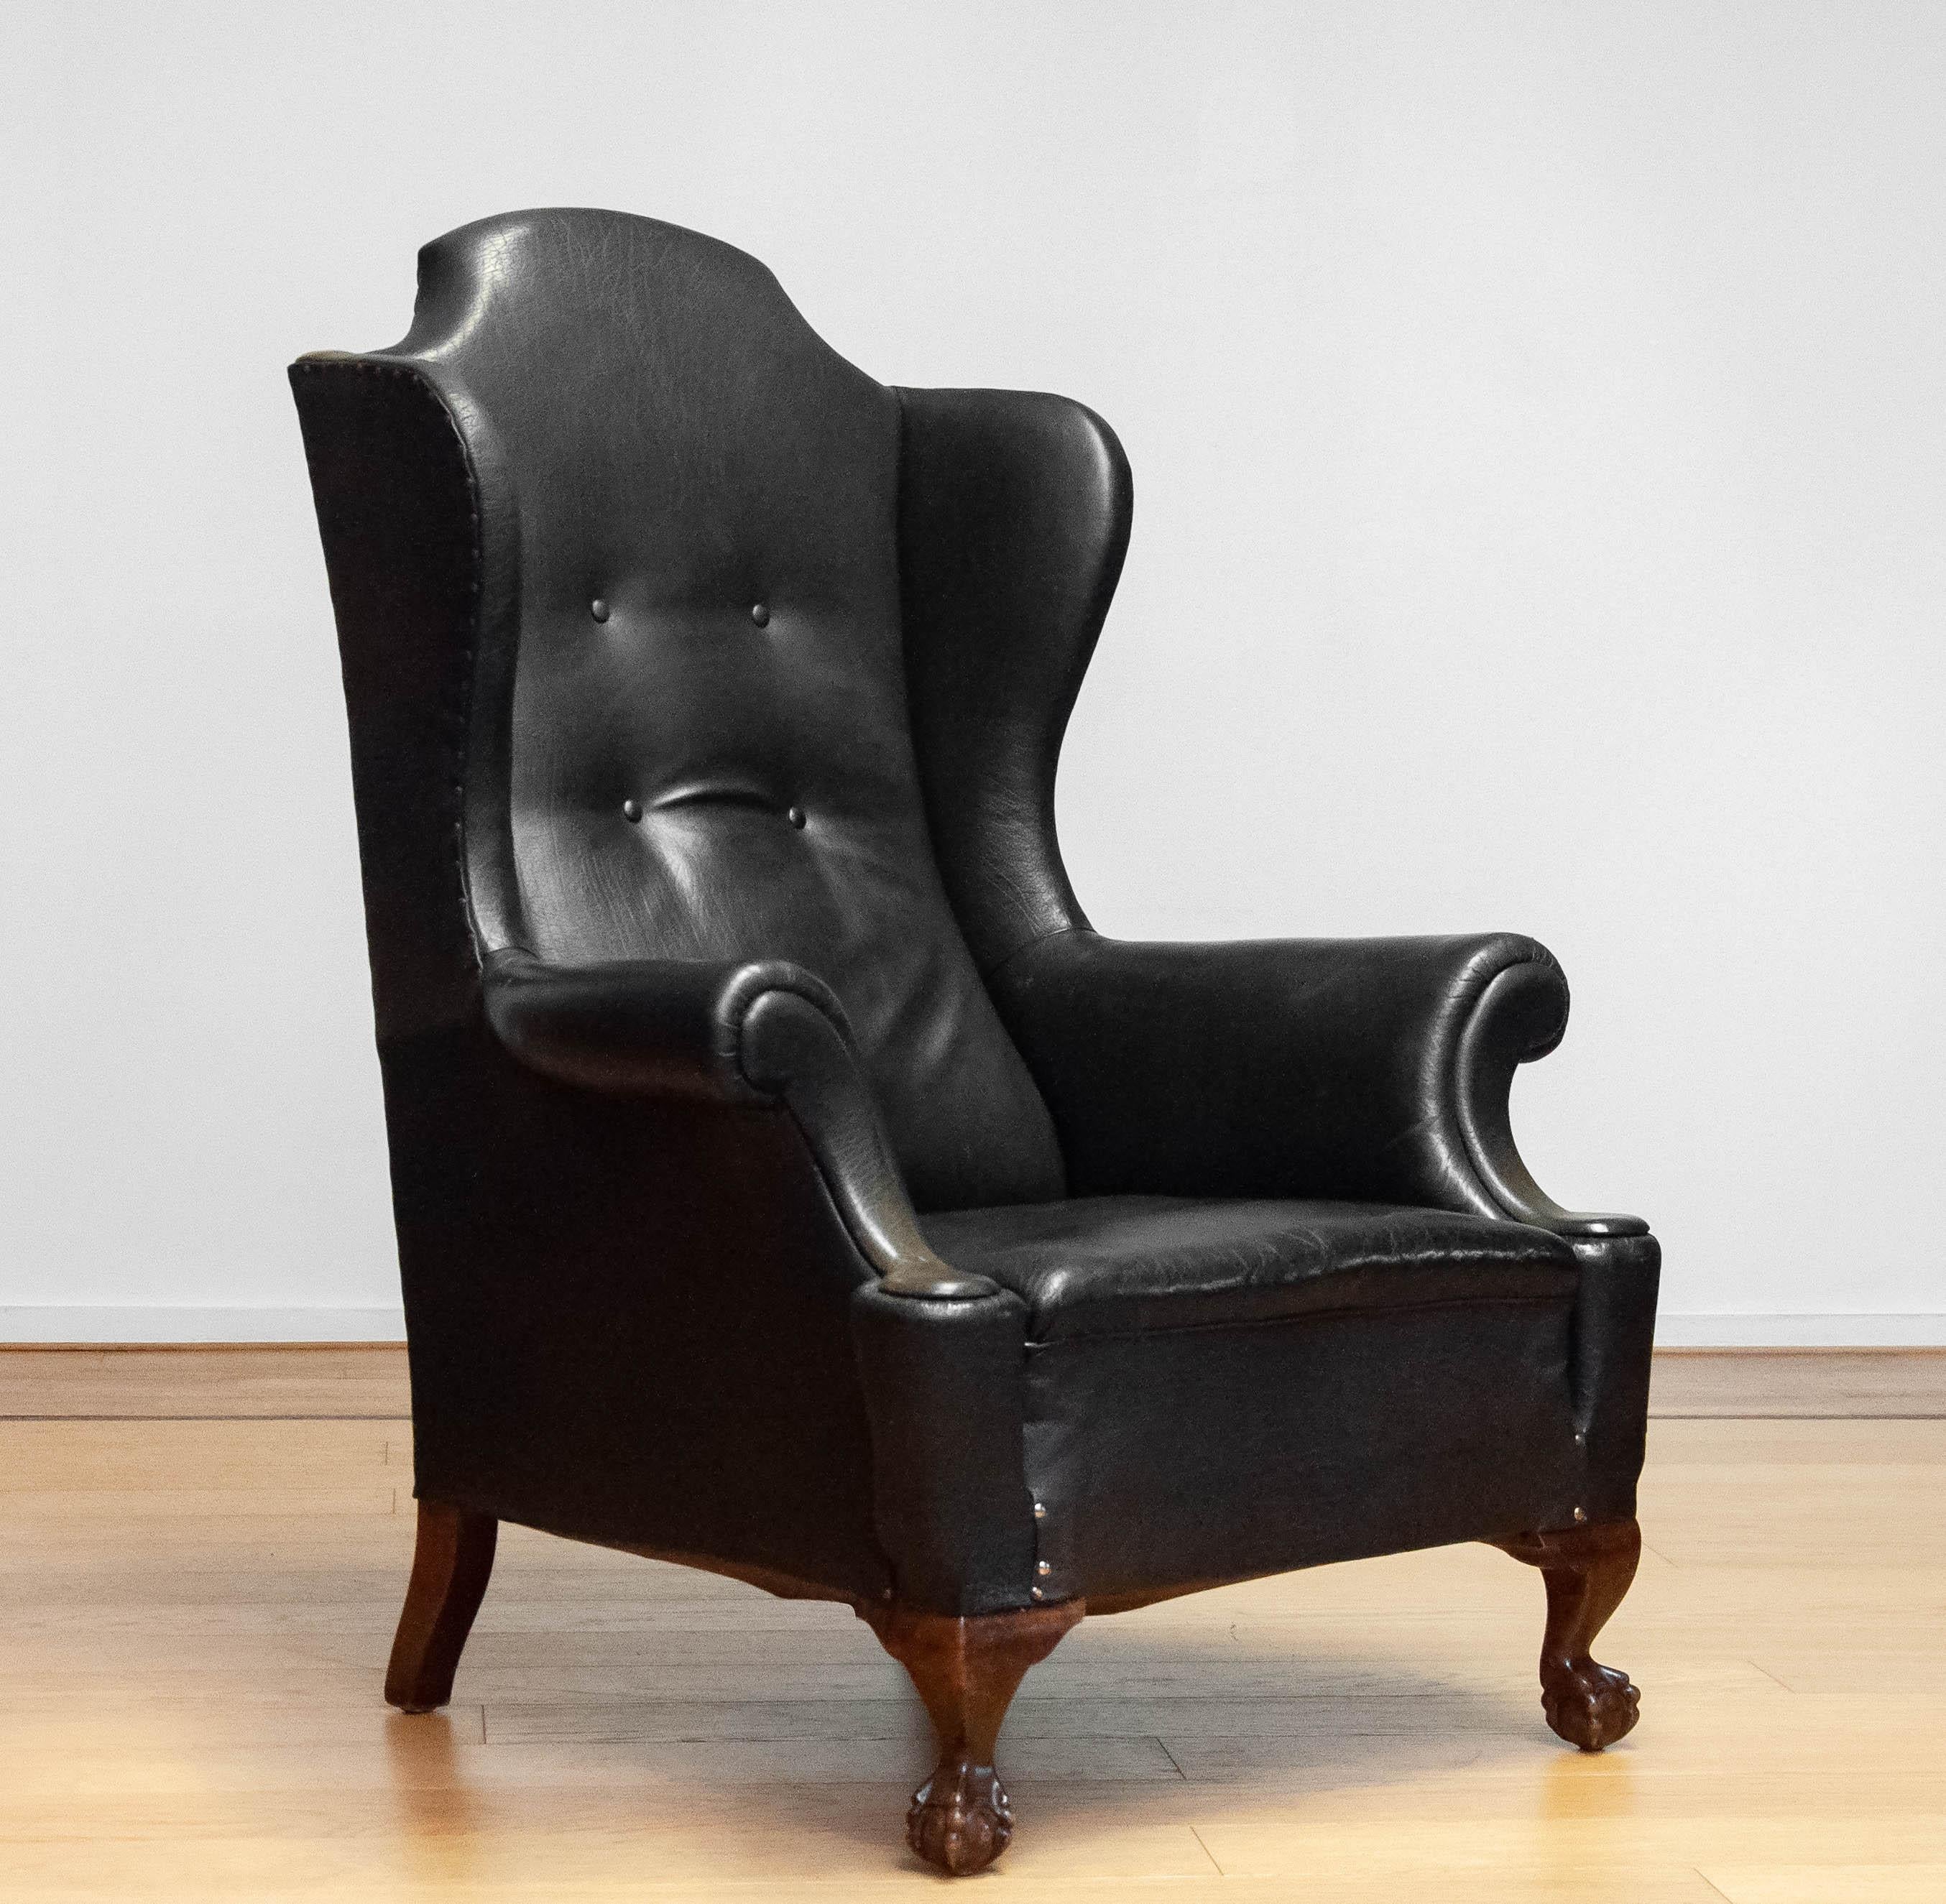 Highly decorative and large black leather 'Thomas Chappendale style' wingback chair from the end of the 19th century. During his live pieces of leather has been replaced what gives this chair a beautiful character and therefor a absolute eye